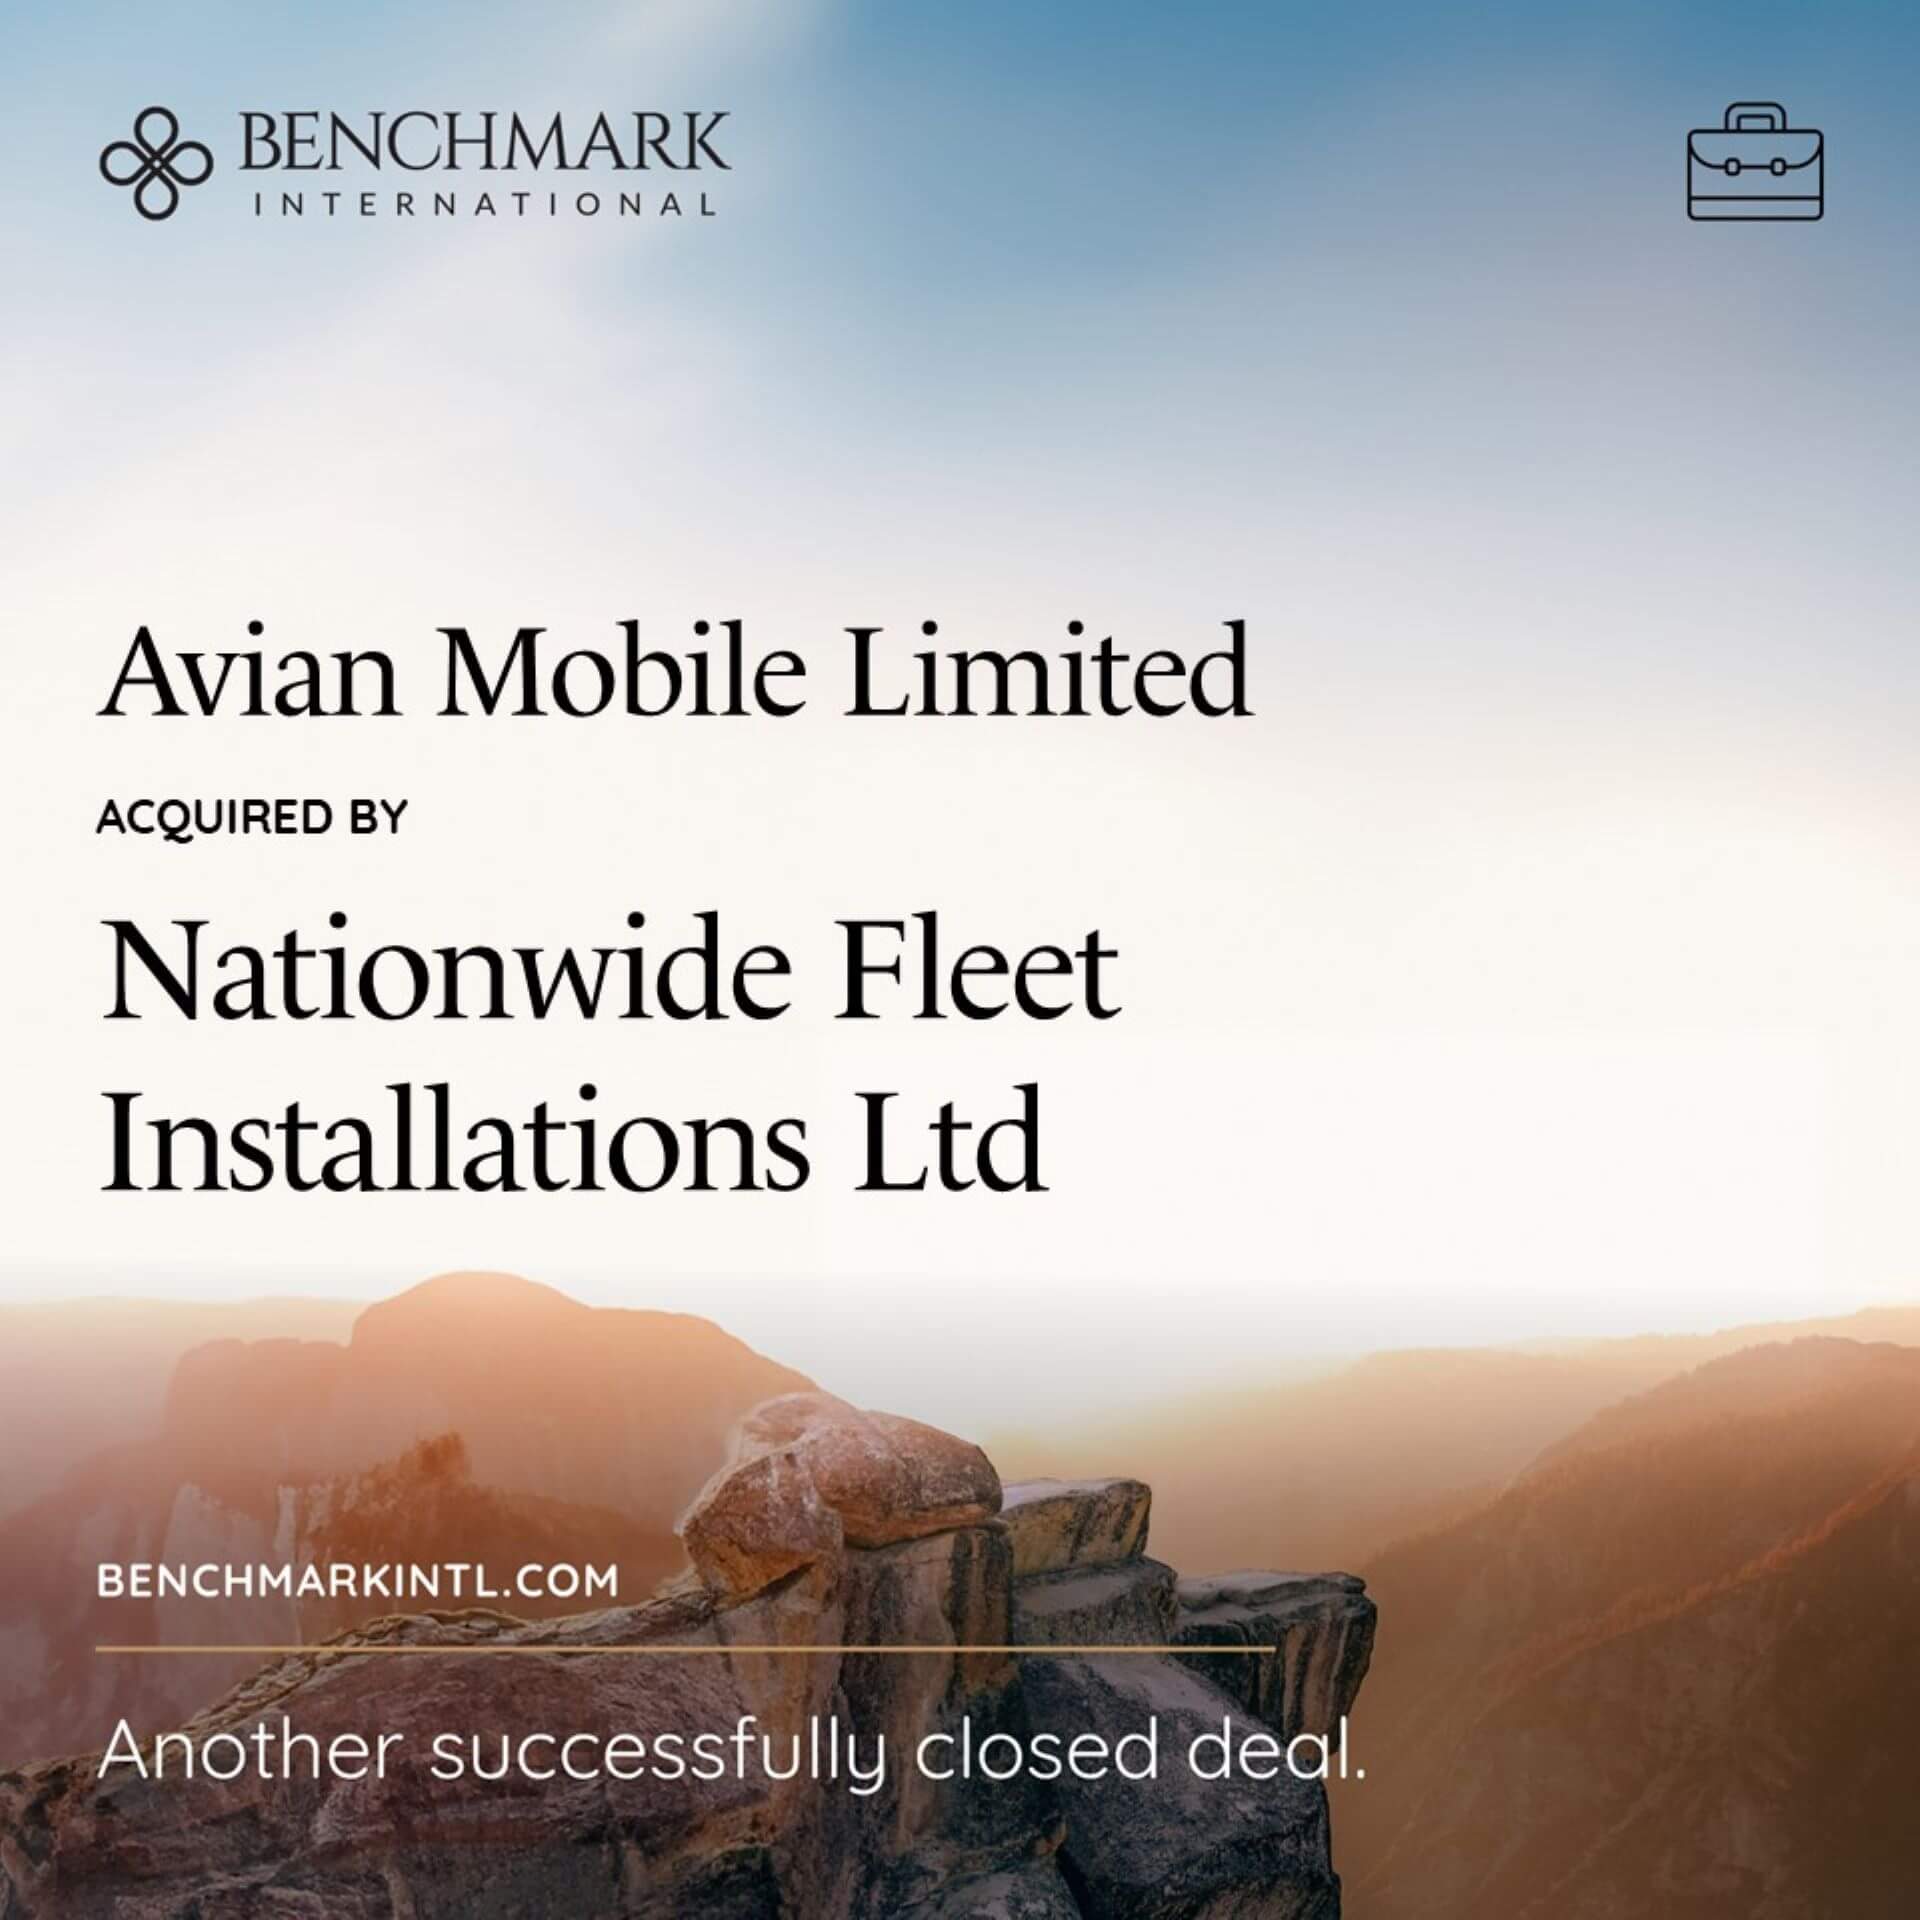 Avian acquired by Nationwide Fleet